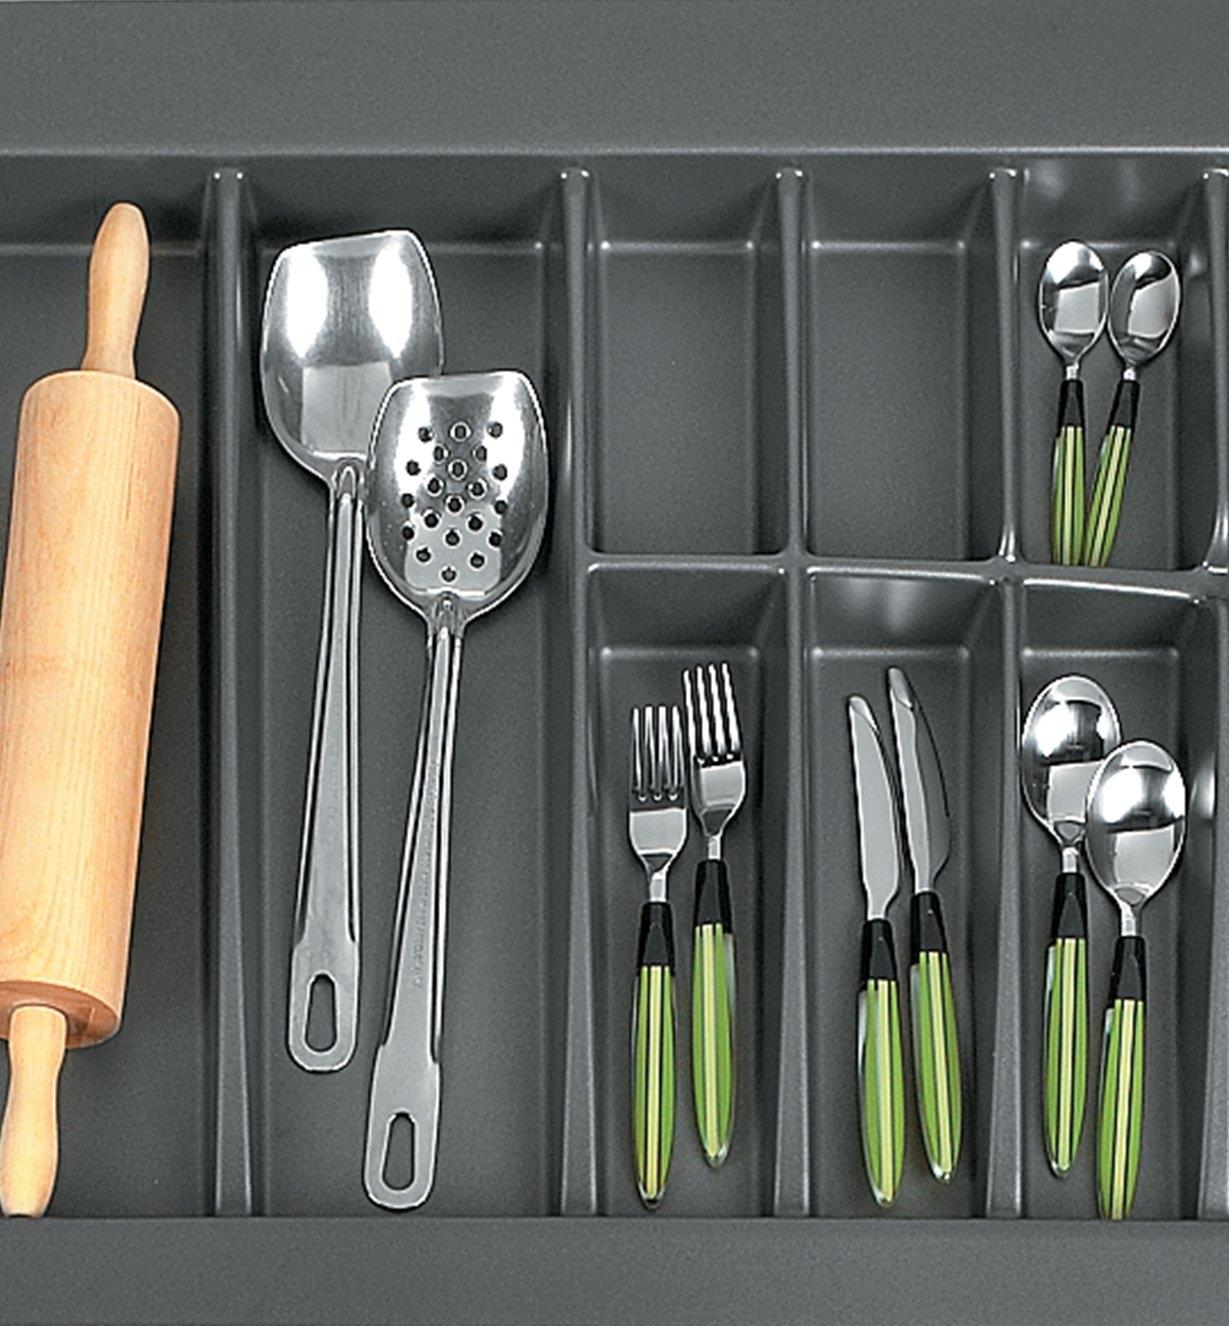 Bridge Drawer Insert filled with silverware and cooking implements